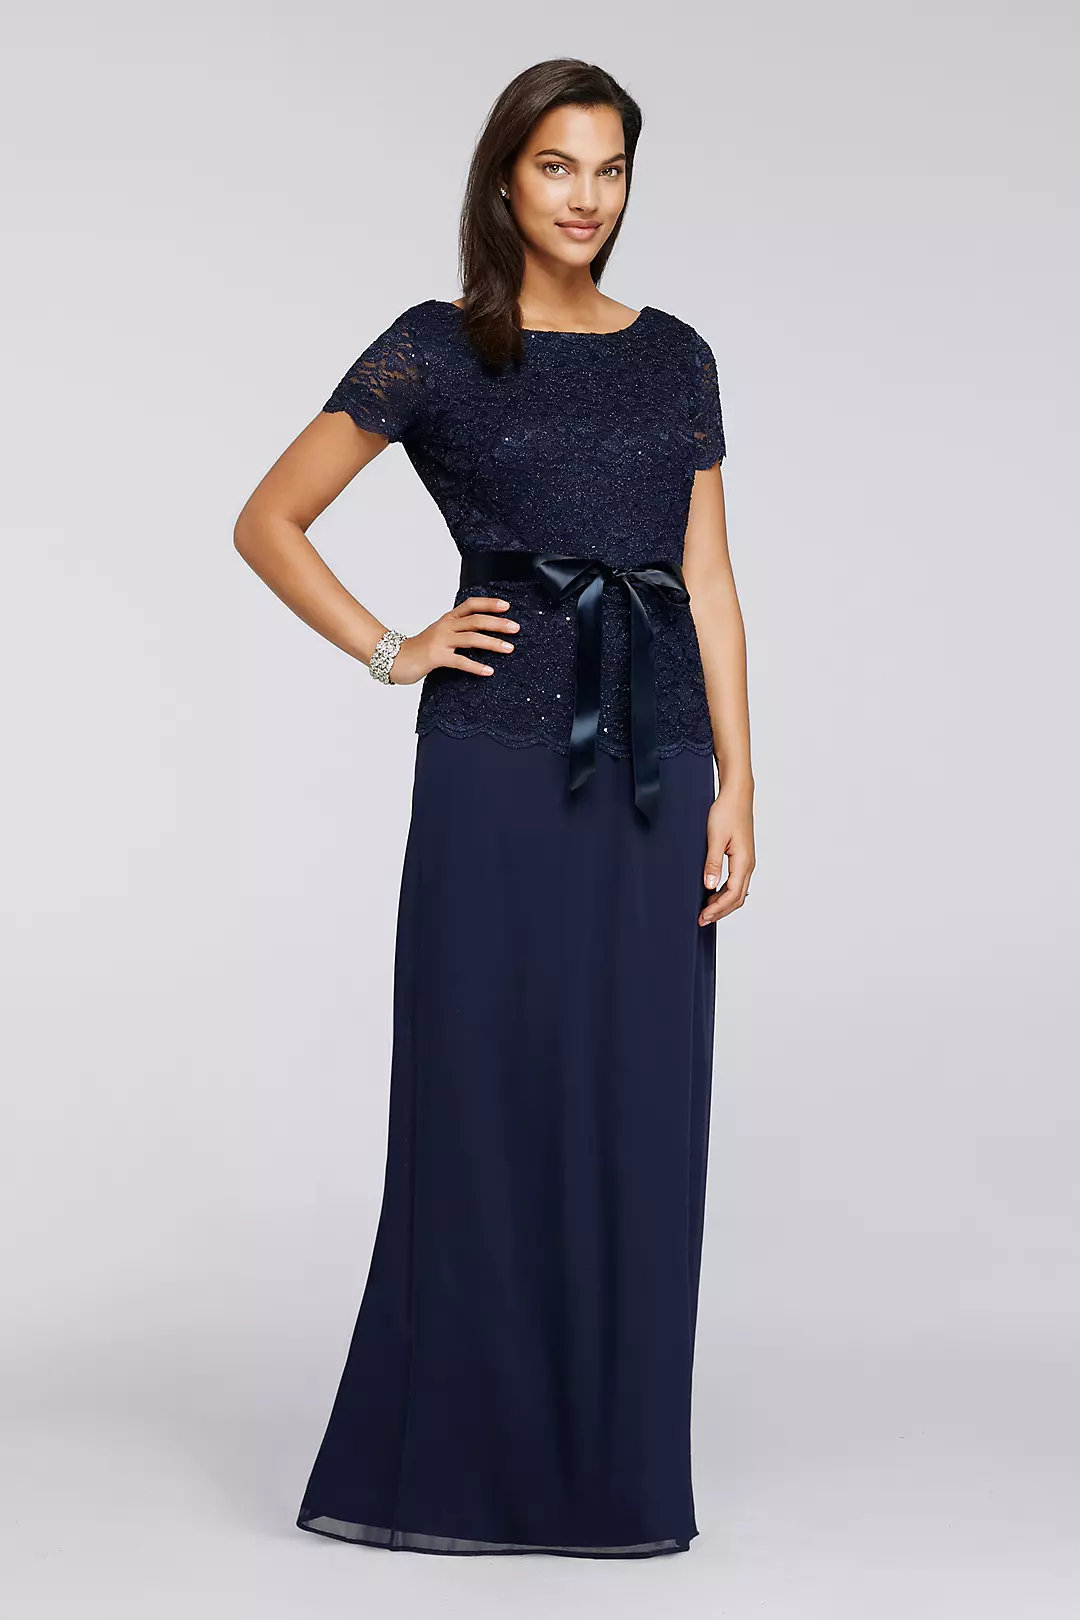 Long Lace Dress with Cap Sleeves and Cowl Back Image